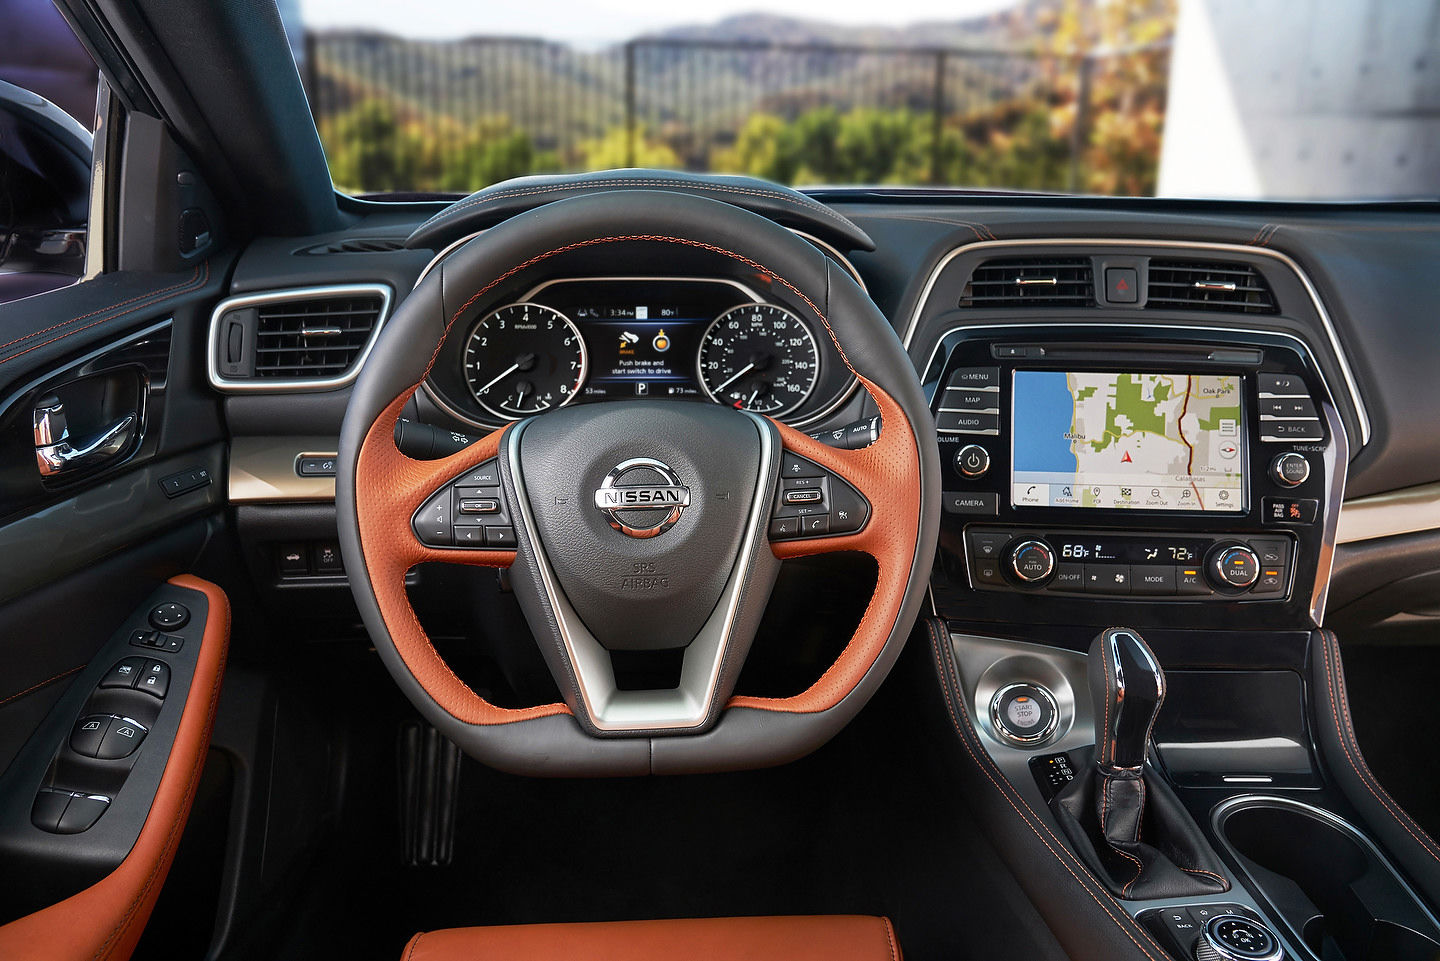 2019 Nissan Maxima hits Los Angeles with impressive technology